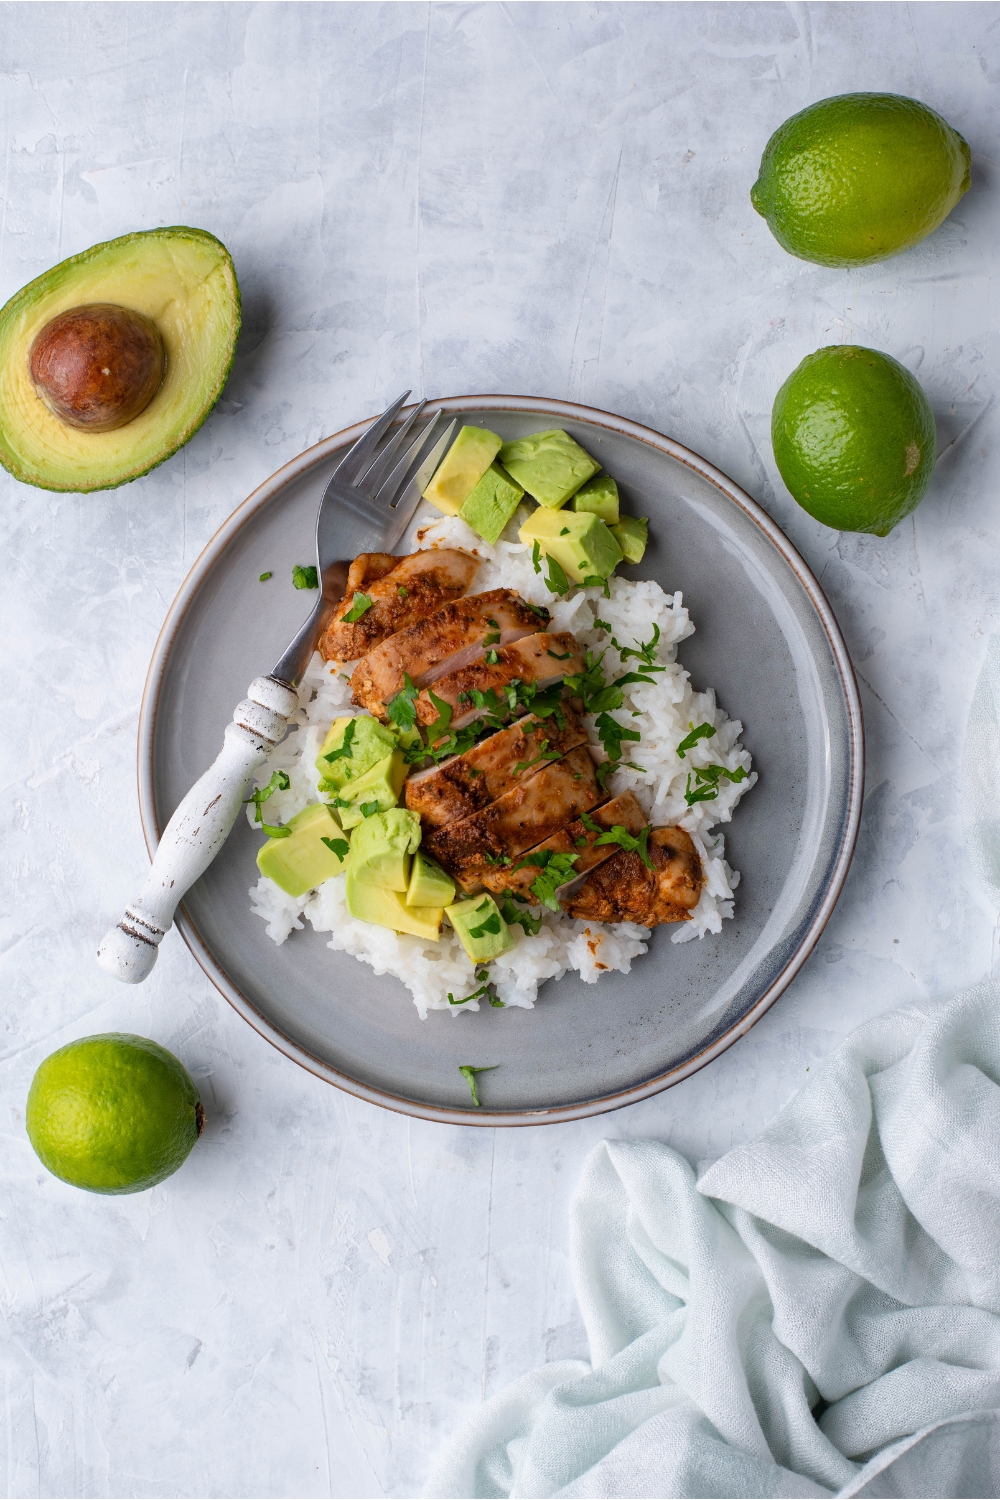 Overview of Chipotle chicken on a bed of white rice garnished with fresh herbs and diced avocado on a blue plate. The chicken is surrounded by limes and a halved avocado.